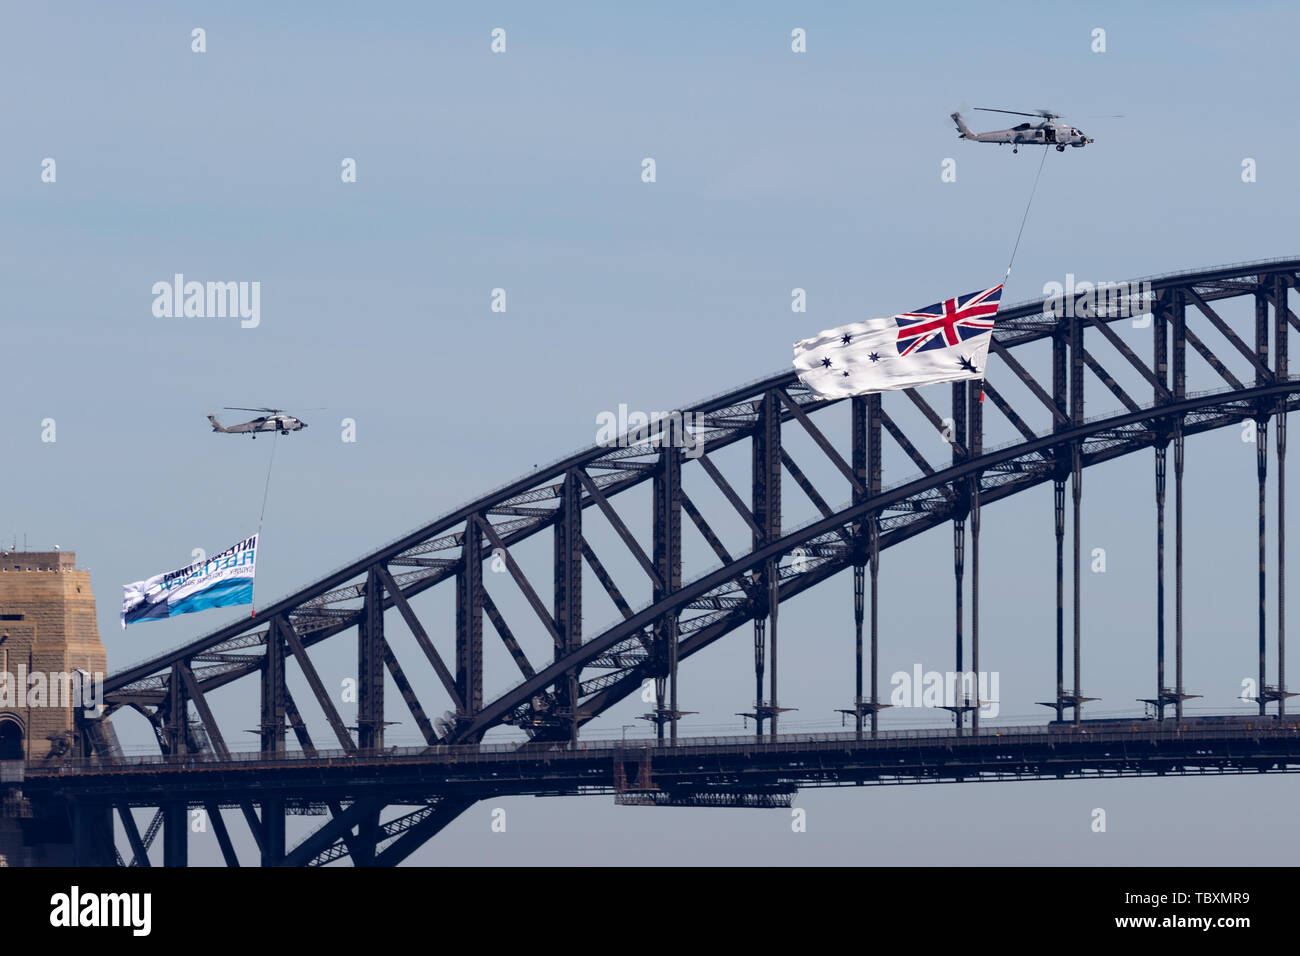 Royal Australian Navy (RAN) Sikorsky S-70B-2 Seahawk Helicopter N24-001 flying the White Ensign of the RAN over Sydney Harbour. Stock Photo